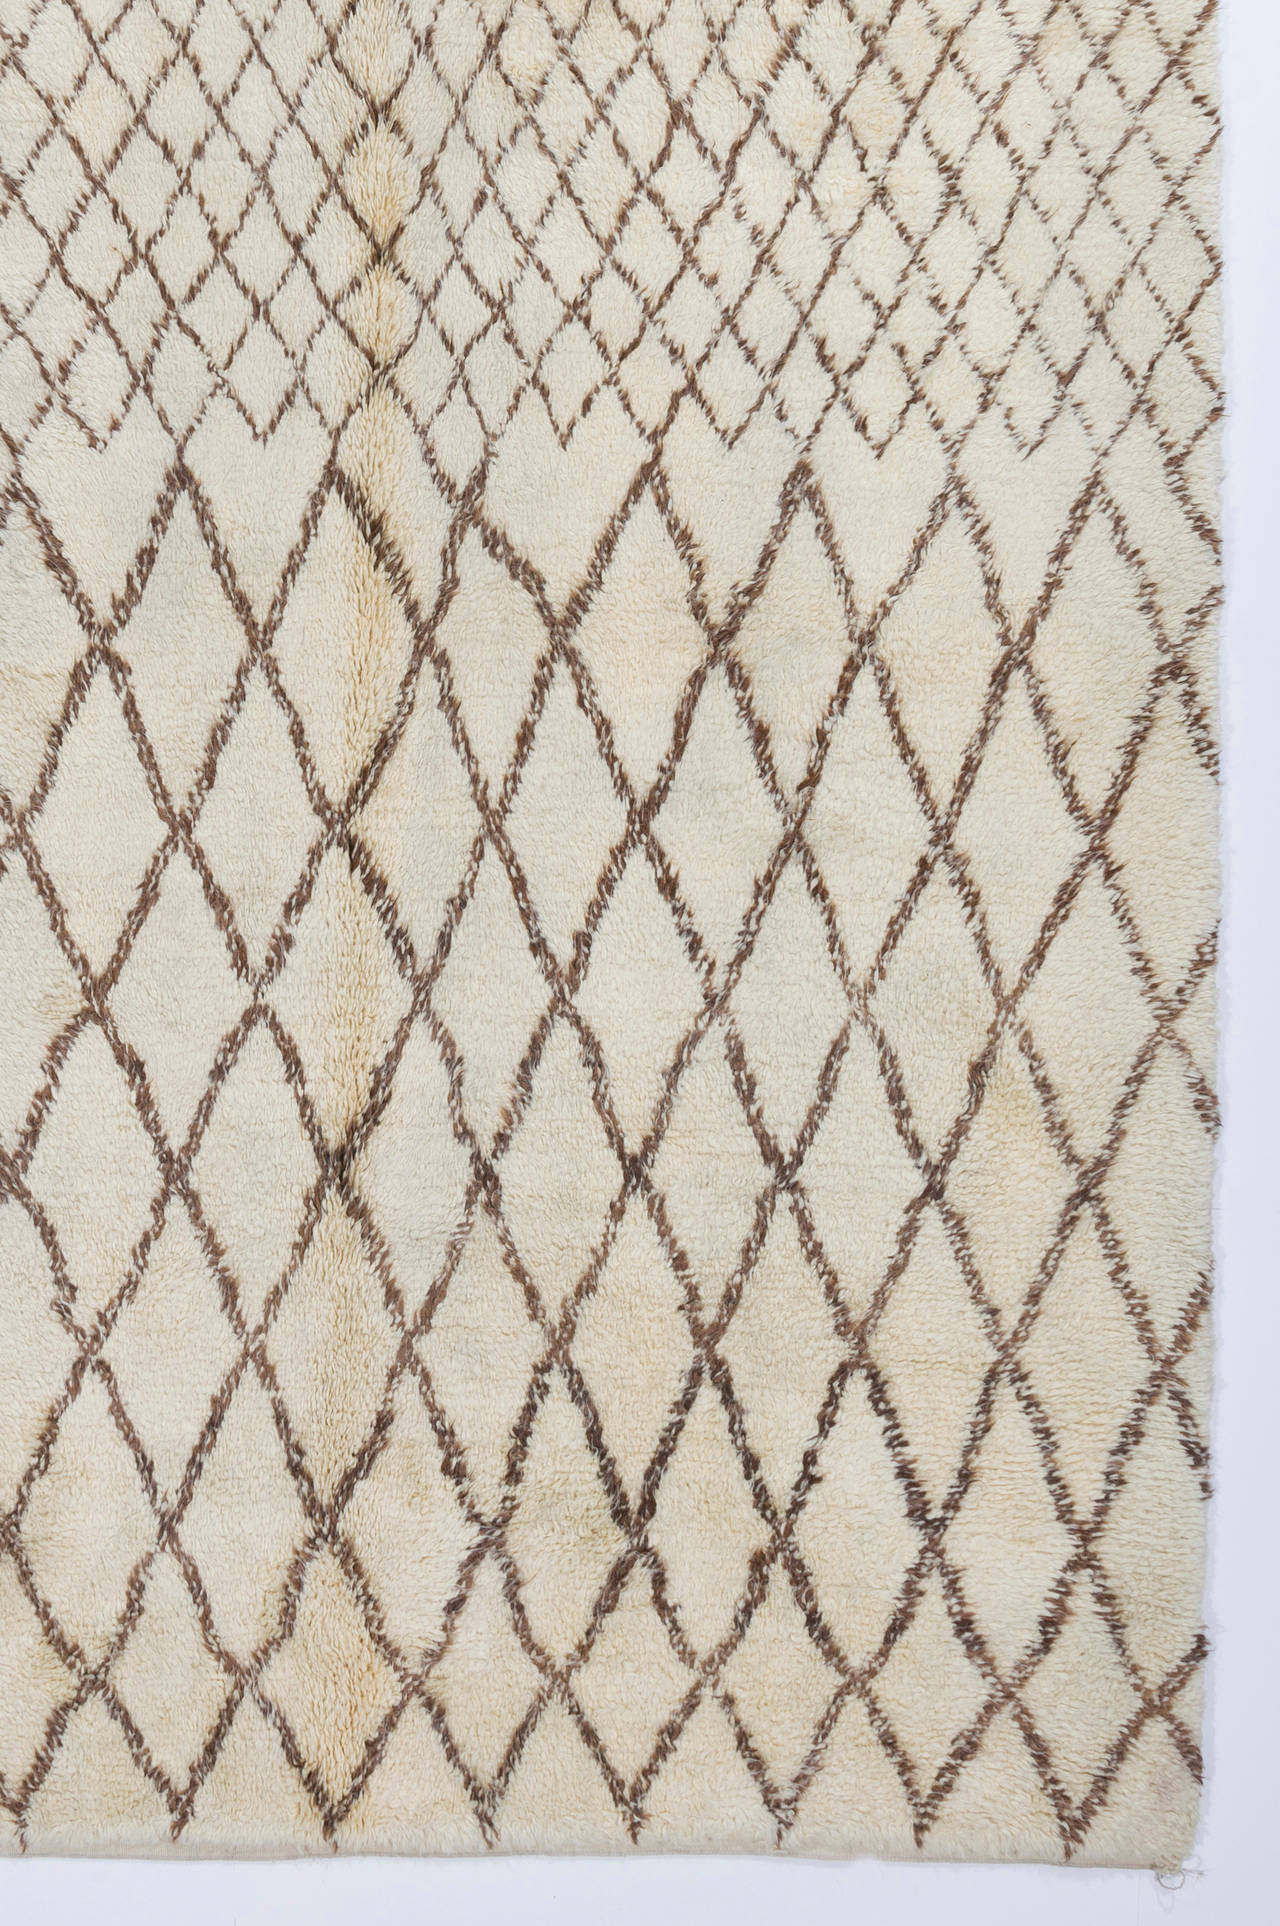 A contemporary handmade Moroccan rug with thick soft pile, made of natural undyed ivory/cream and brown wool.
Very soft and comfy, pleasure to walk or lay on. 
The rug is made-to-order and customizable. We can make it in any size, pile hight, color